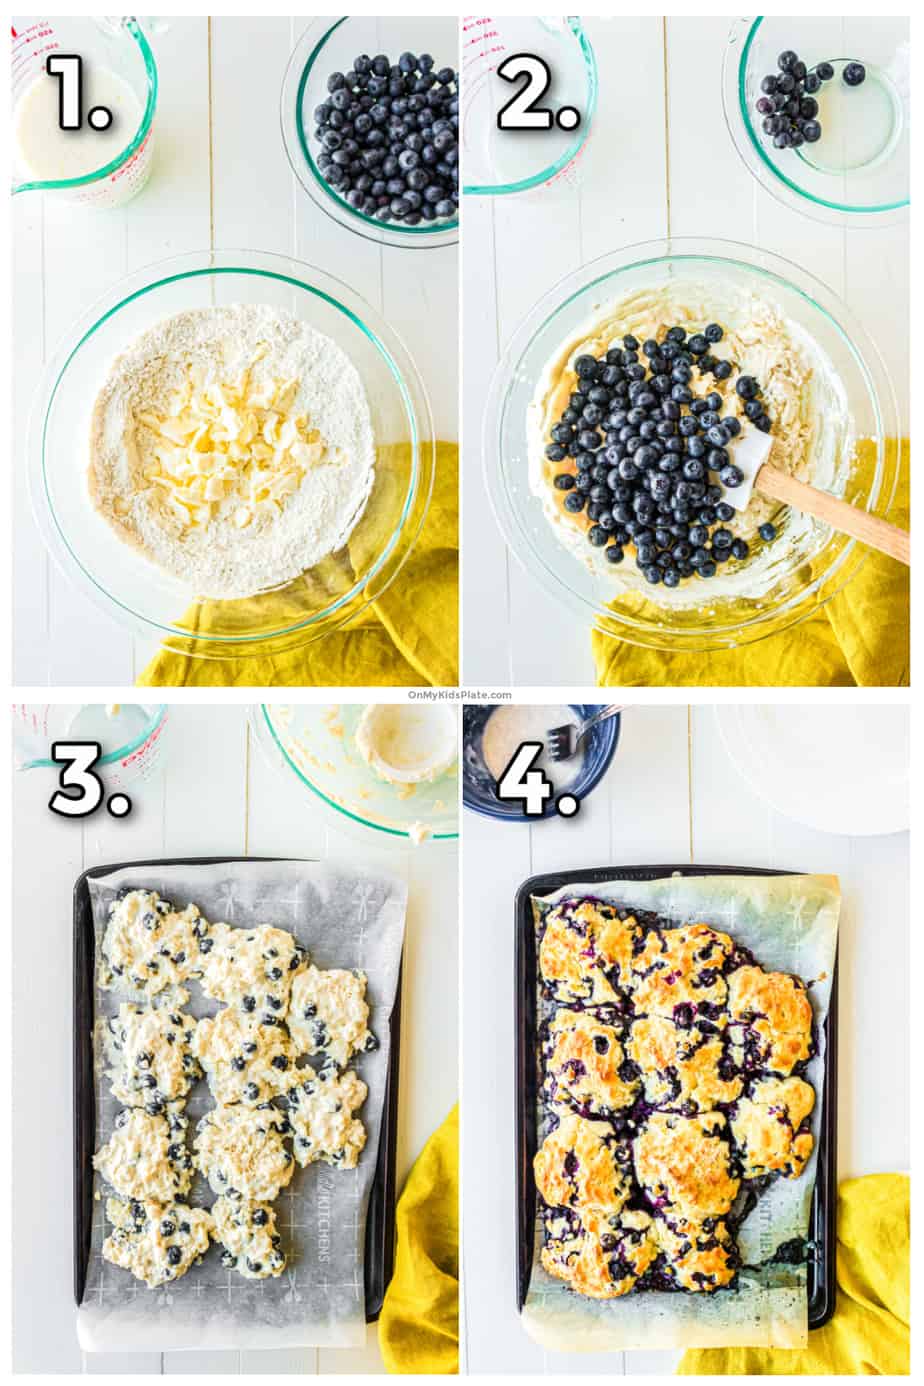 Step by step images mixing the biscuits, adding blueberries, putting on the pan and baking.